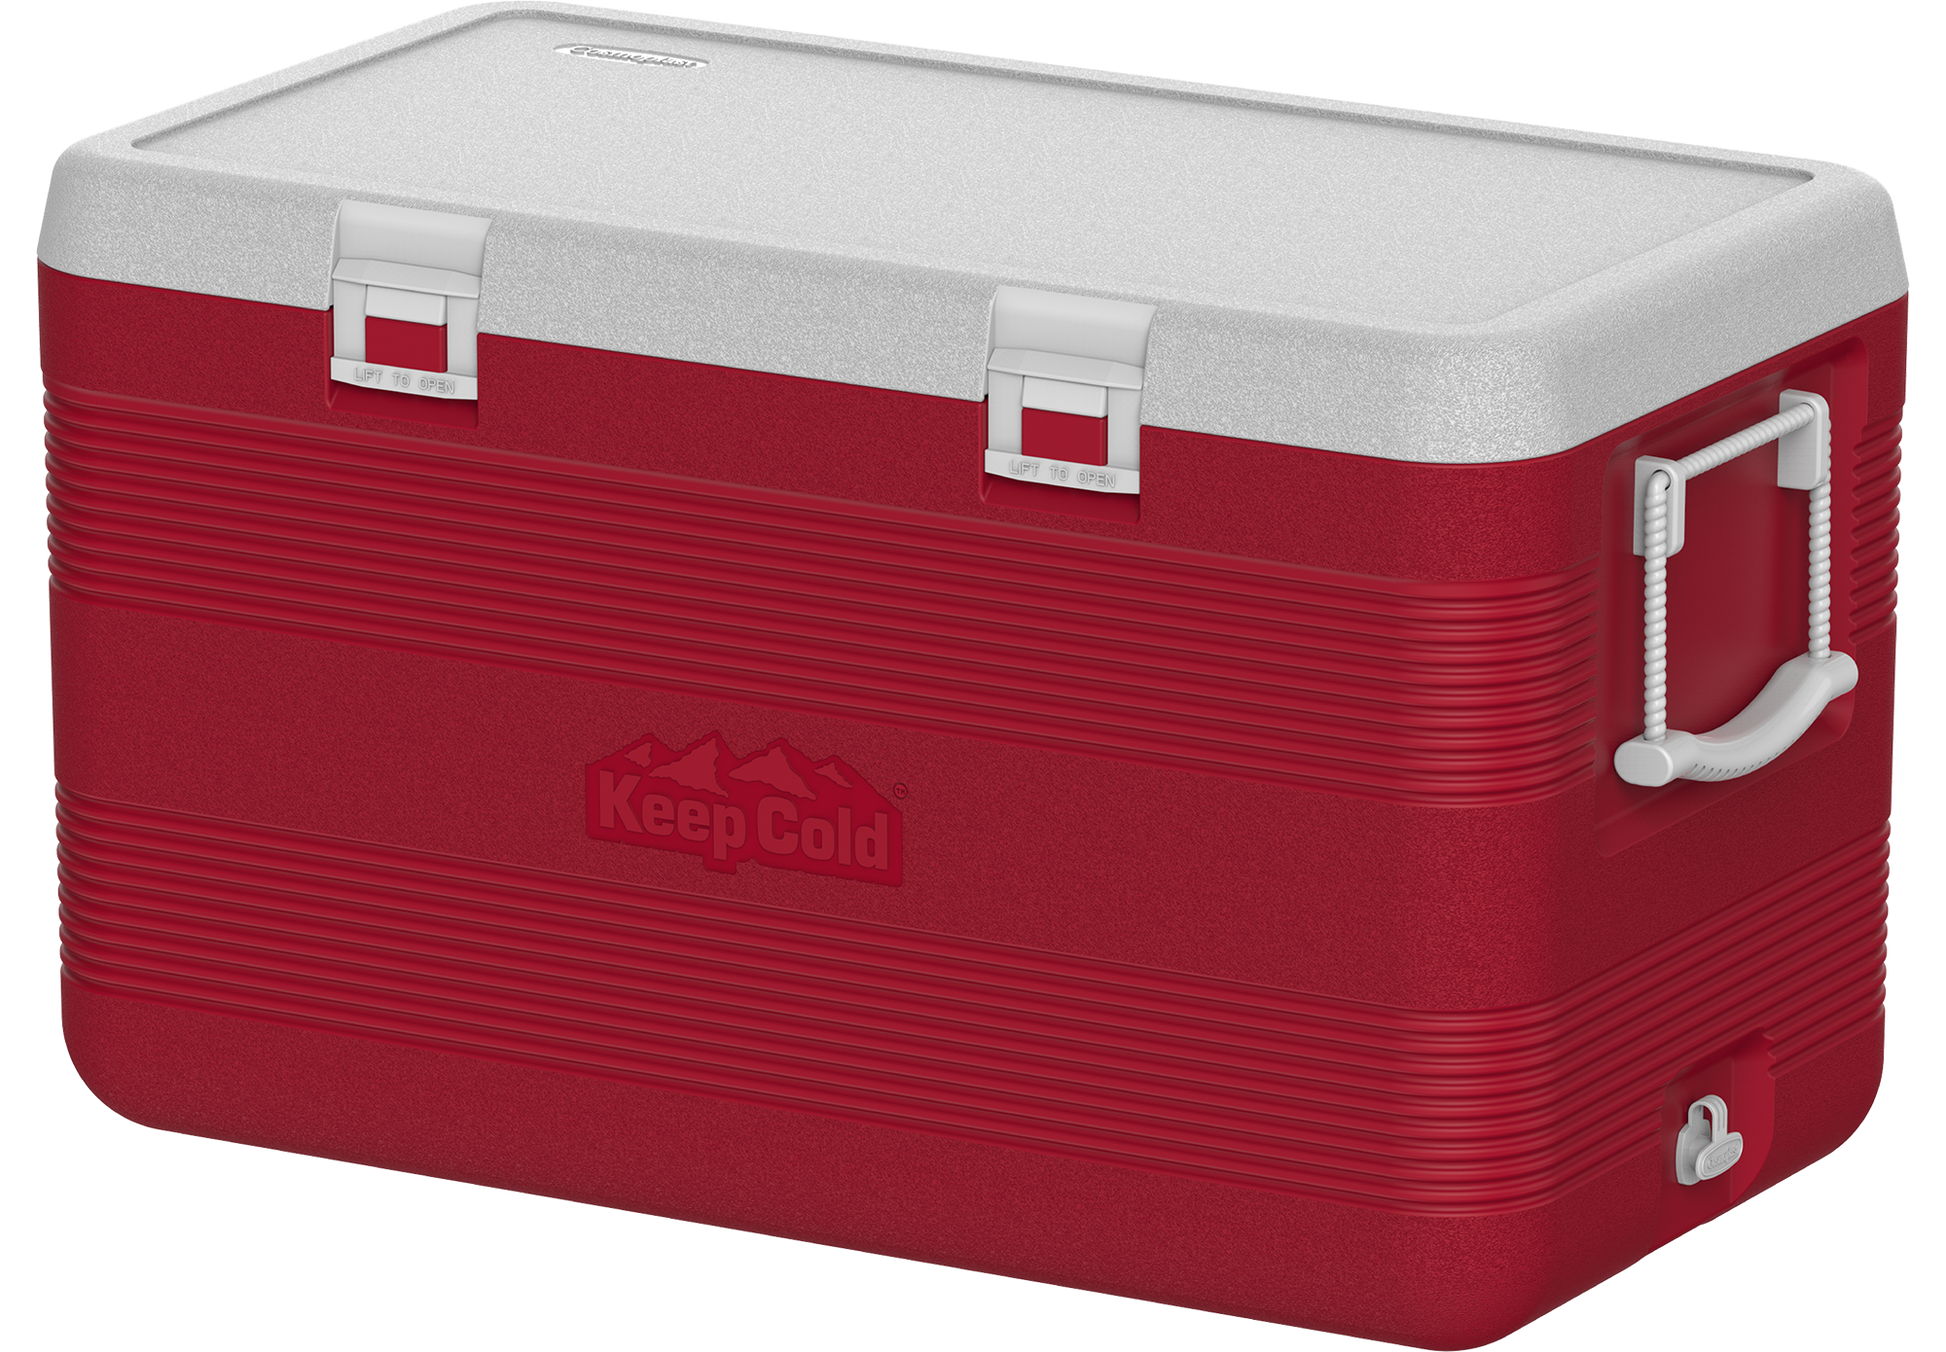 127L KeepCold Deluxe Icebox - Cosmoplast Bahrain